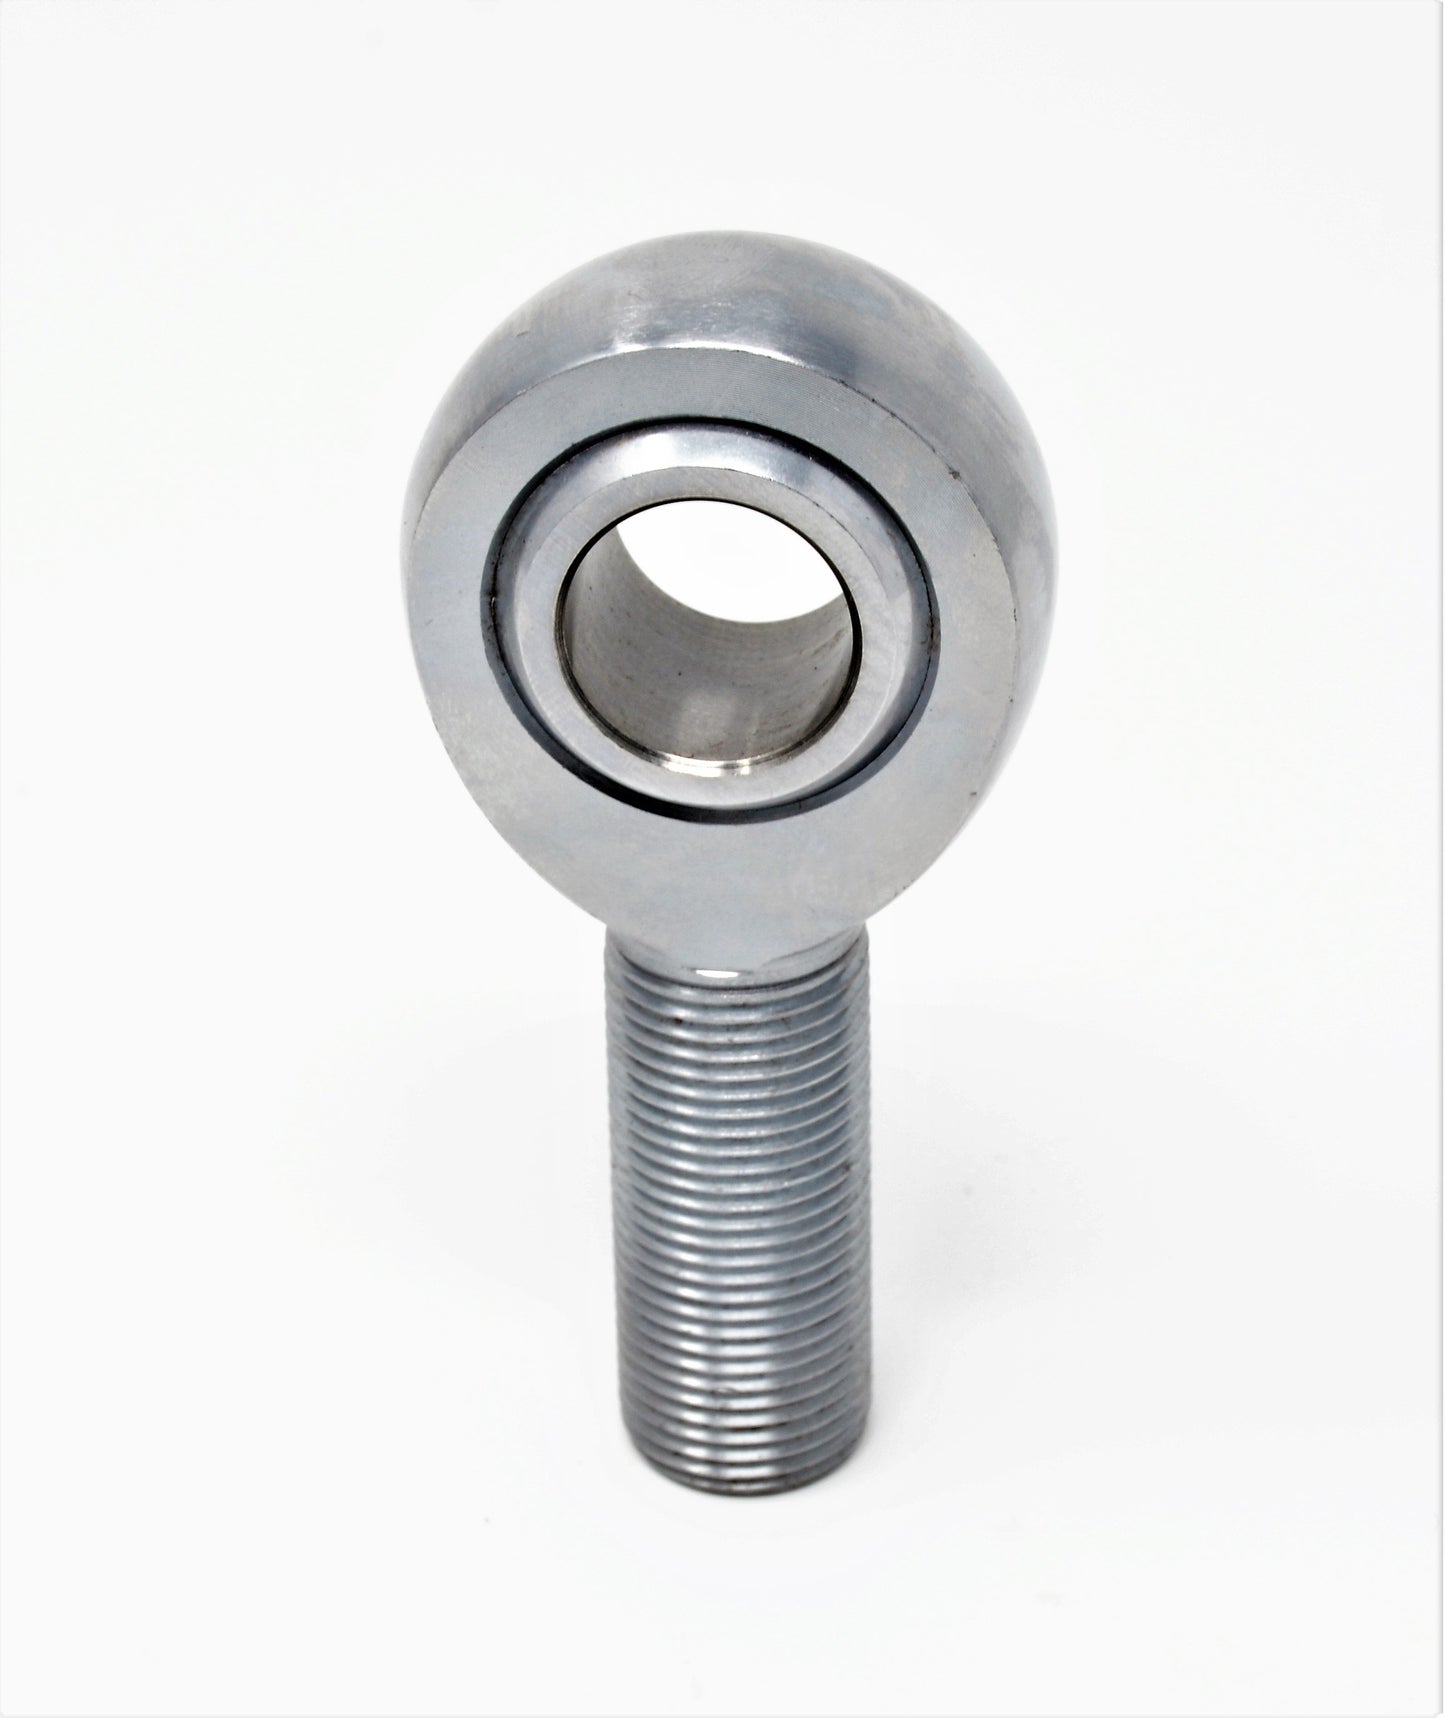 .750" 3/4” Rod End Heim Joint KIT Right hand thread (normal)